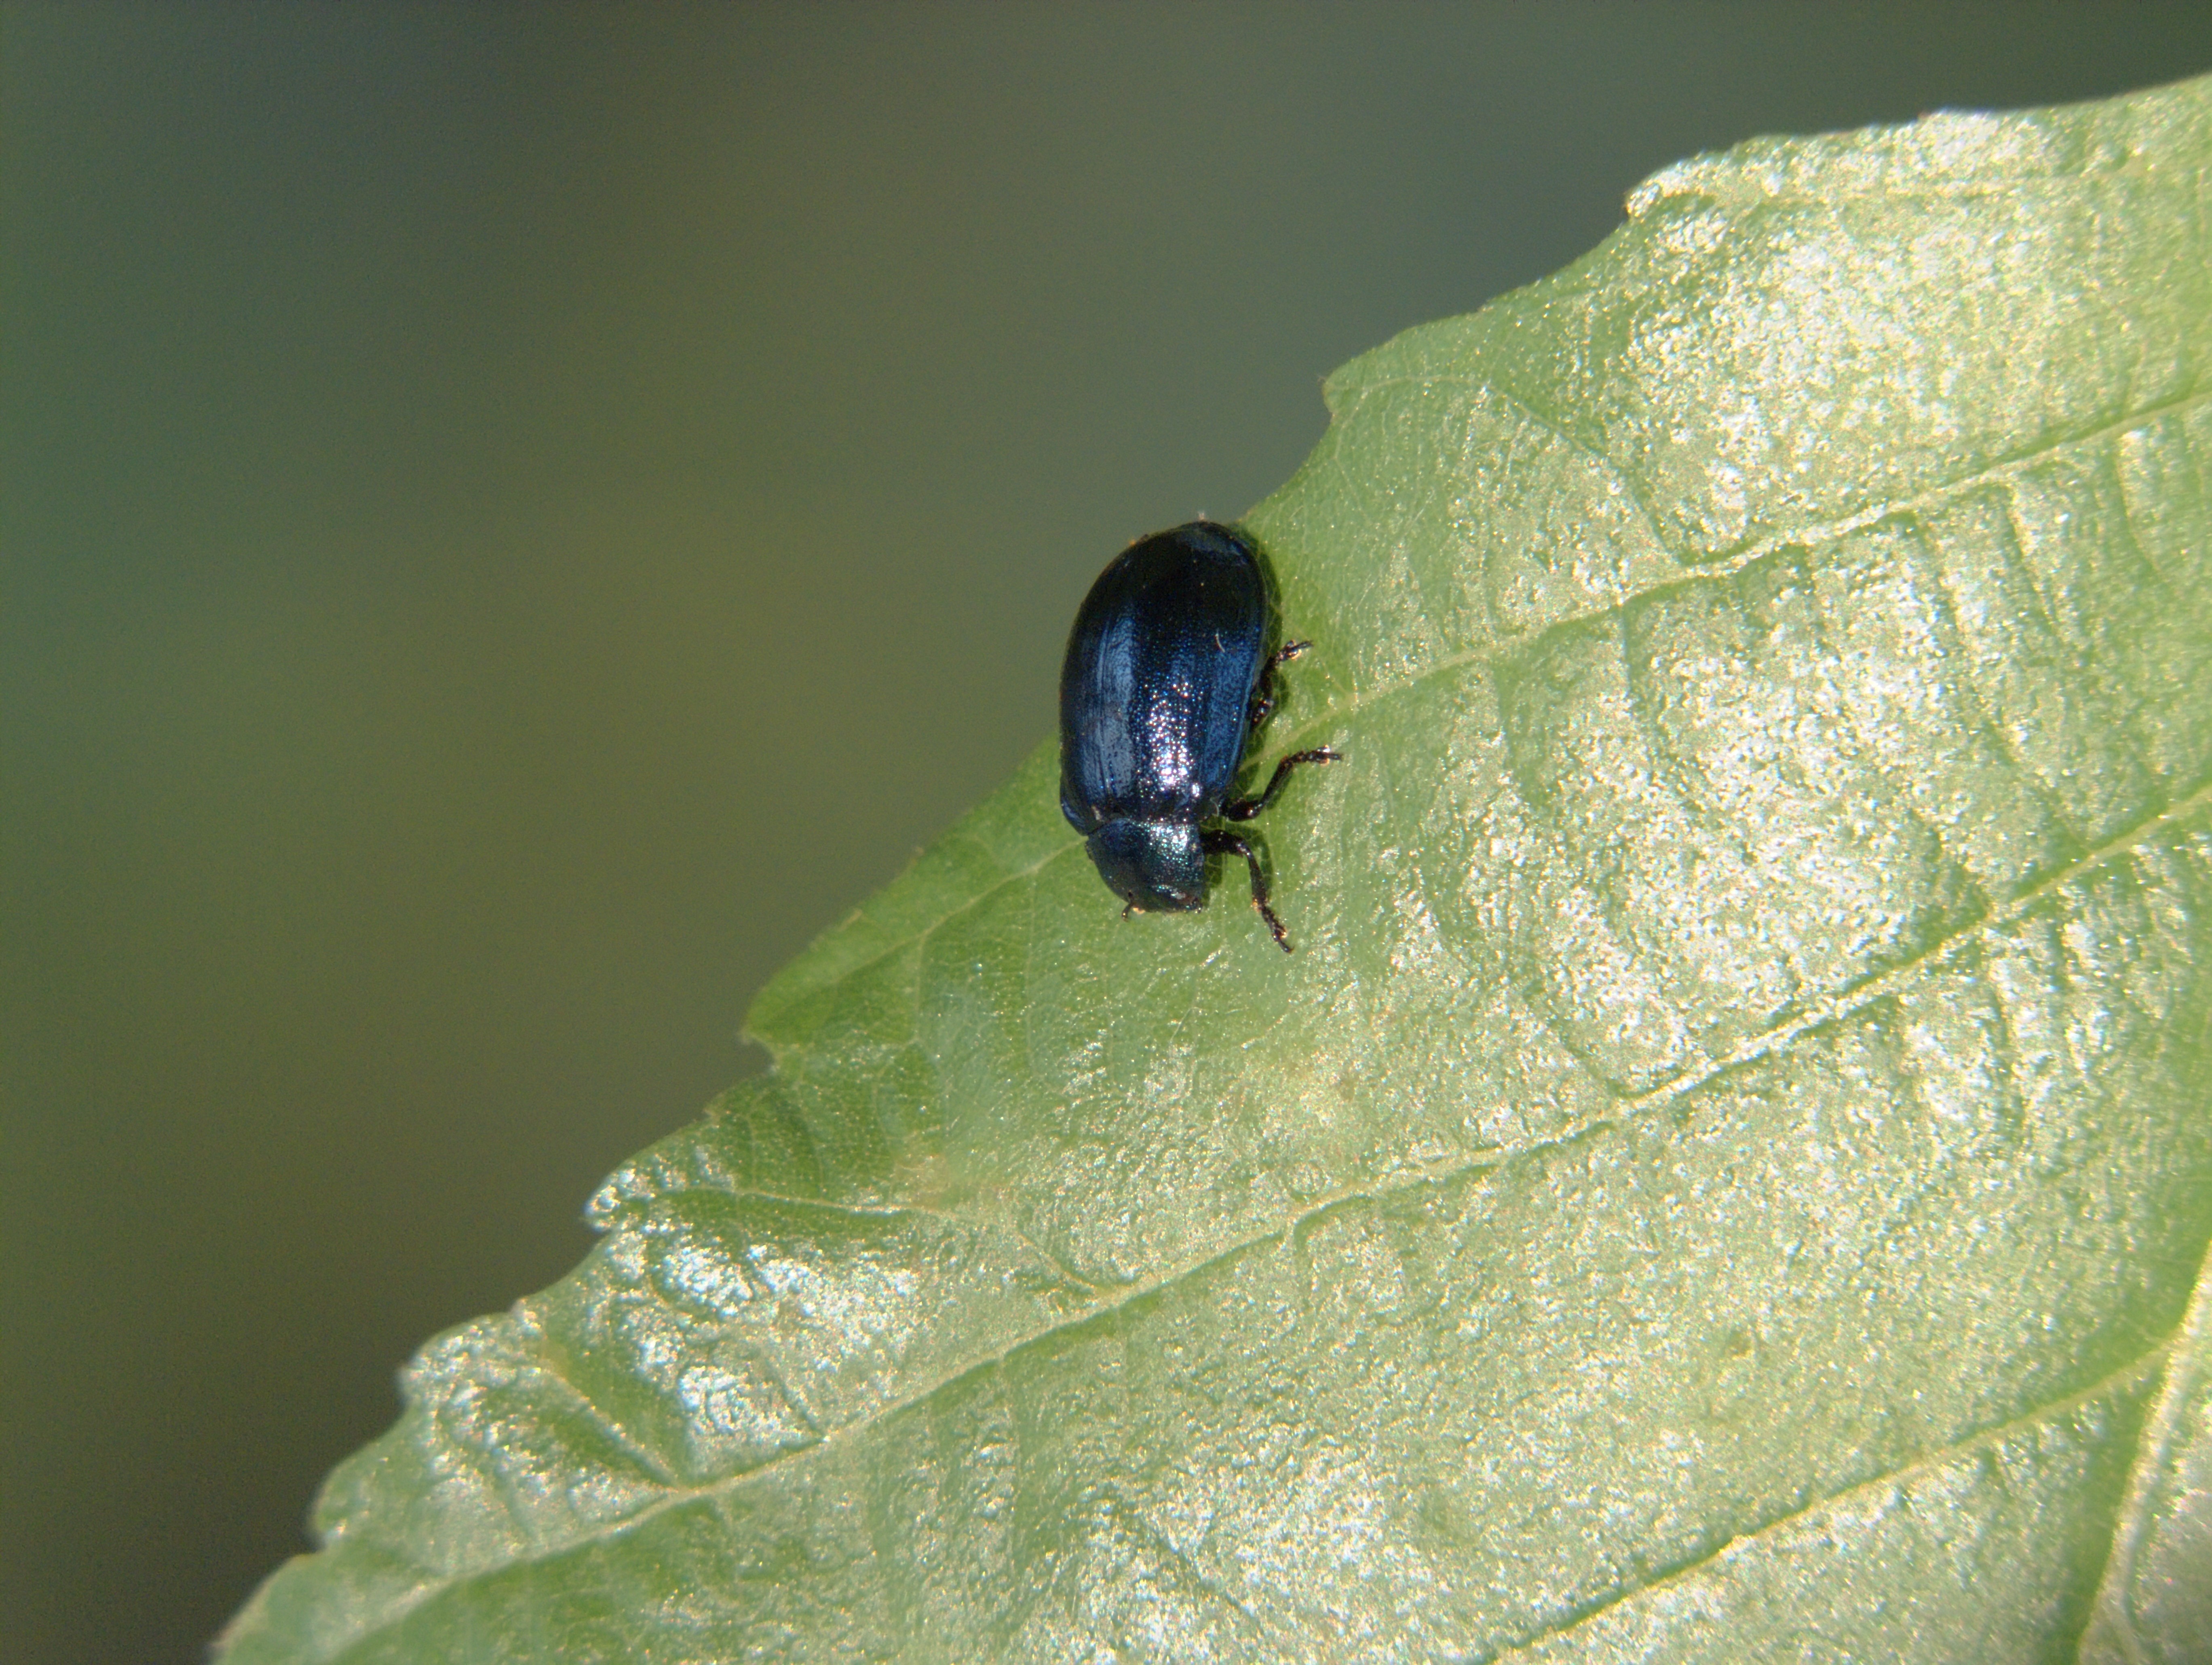 Cadrezzate (Varese, Italy): Crisomelide beetle species not identified with certainty - Cadrezzate (Varese, Italy)